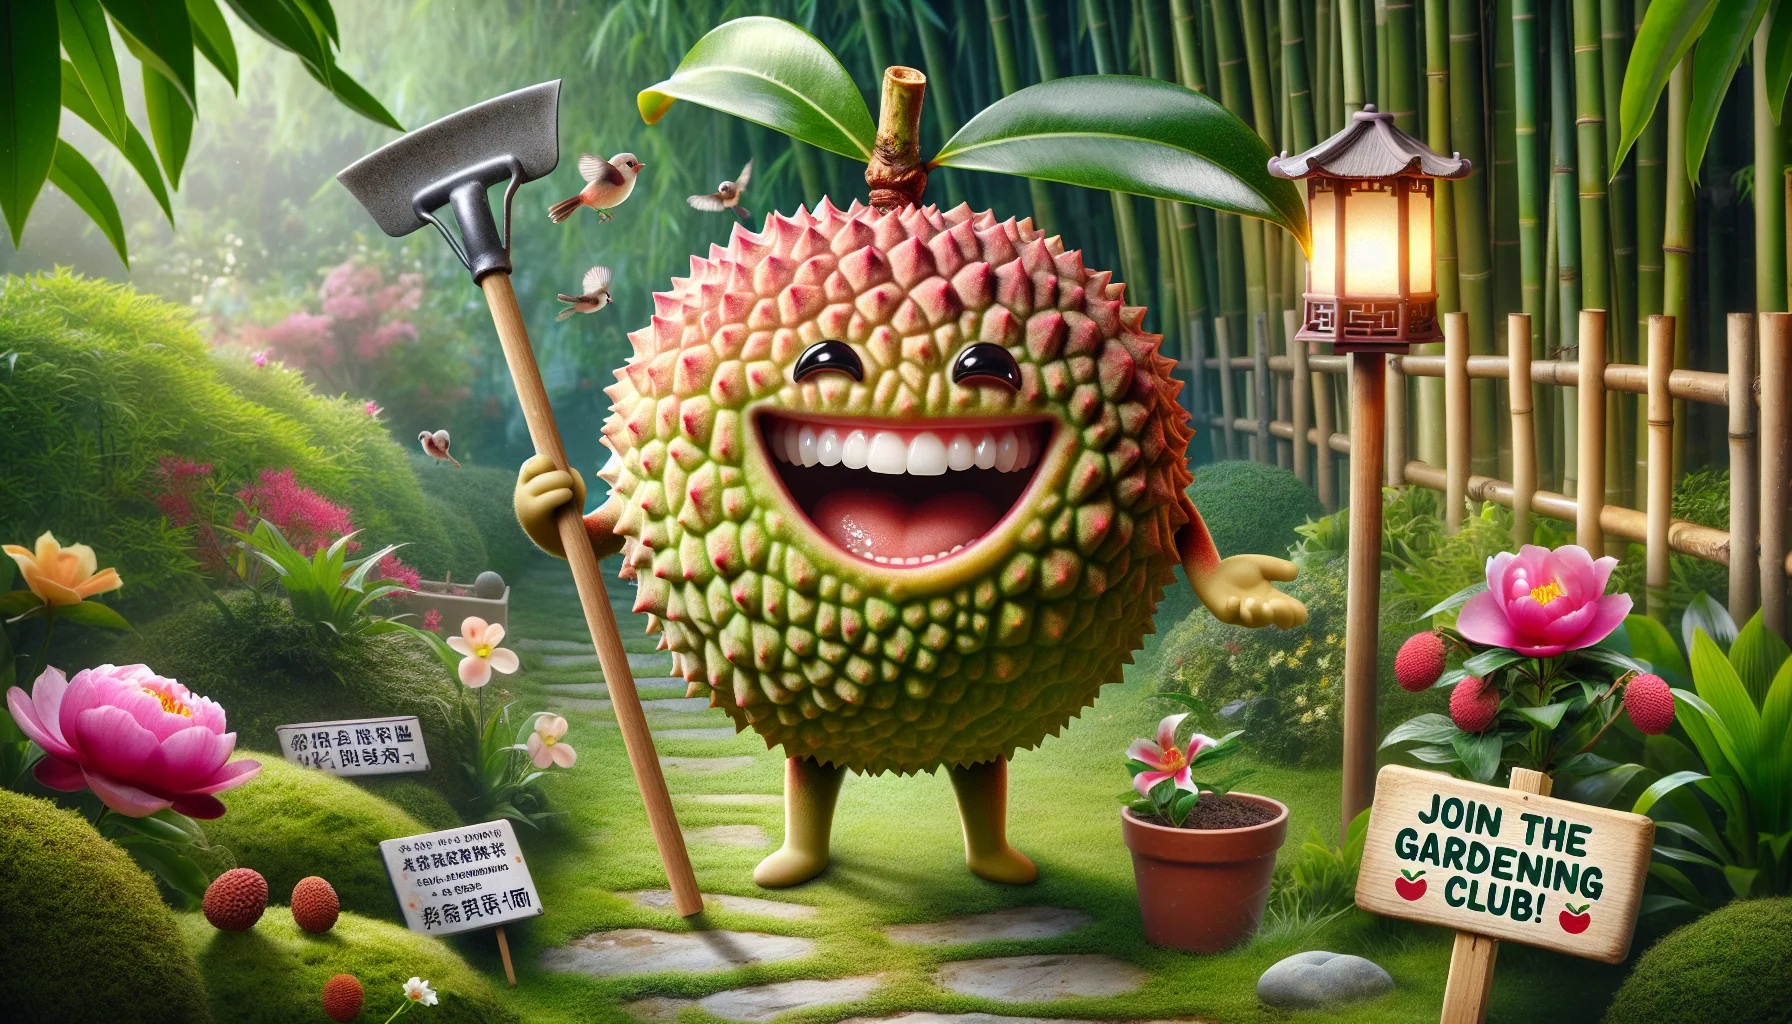 Imagine a humorous image of a lychee fruit having an anthropomorphic feature, displaying a wide grin and showcasing its juicy interior. It's standing in a lush garden, holding a miniature rake and inviting viewers to join its gardening fun. The background is full of plant diversity typically found in a Chinese garden, with bamboo, peonies, and plum blossoms. Charming little lanterns light the path, birds are chirping, and a placard reads 'Join the Gardening Club!' This mirthful interpretation celebrates the joy and appeal of horticultural activities.